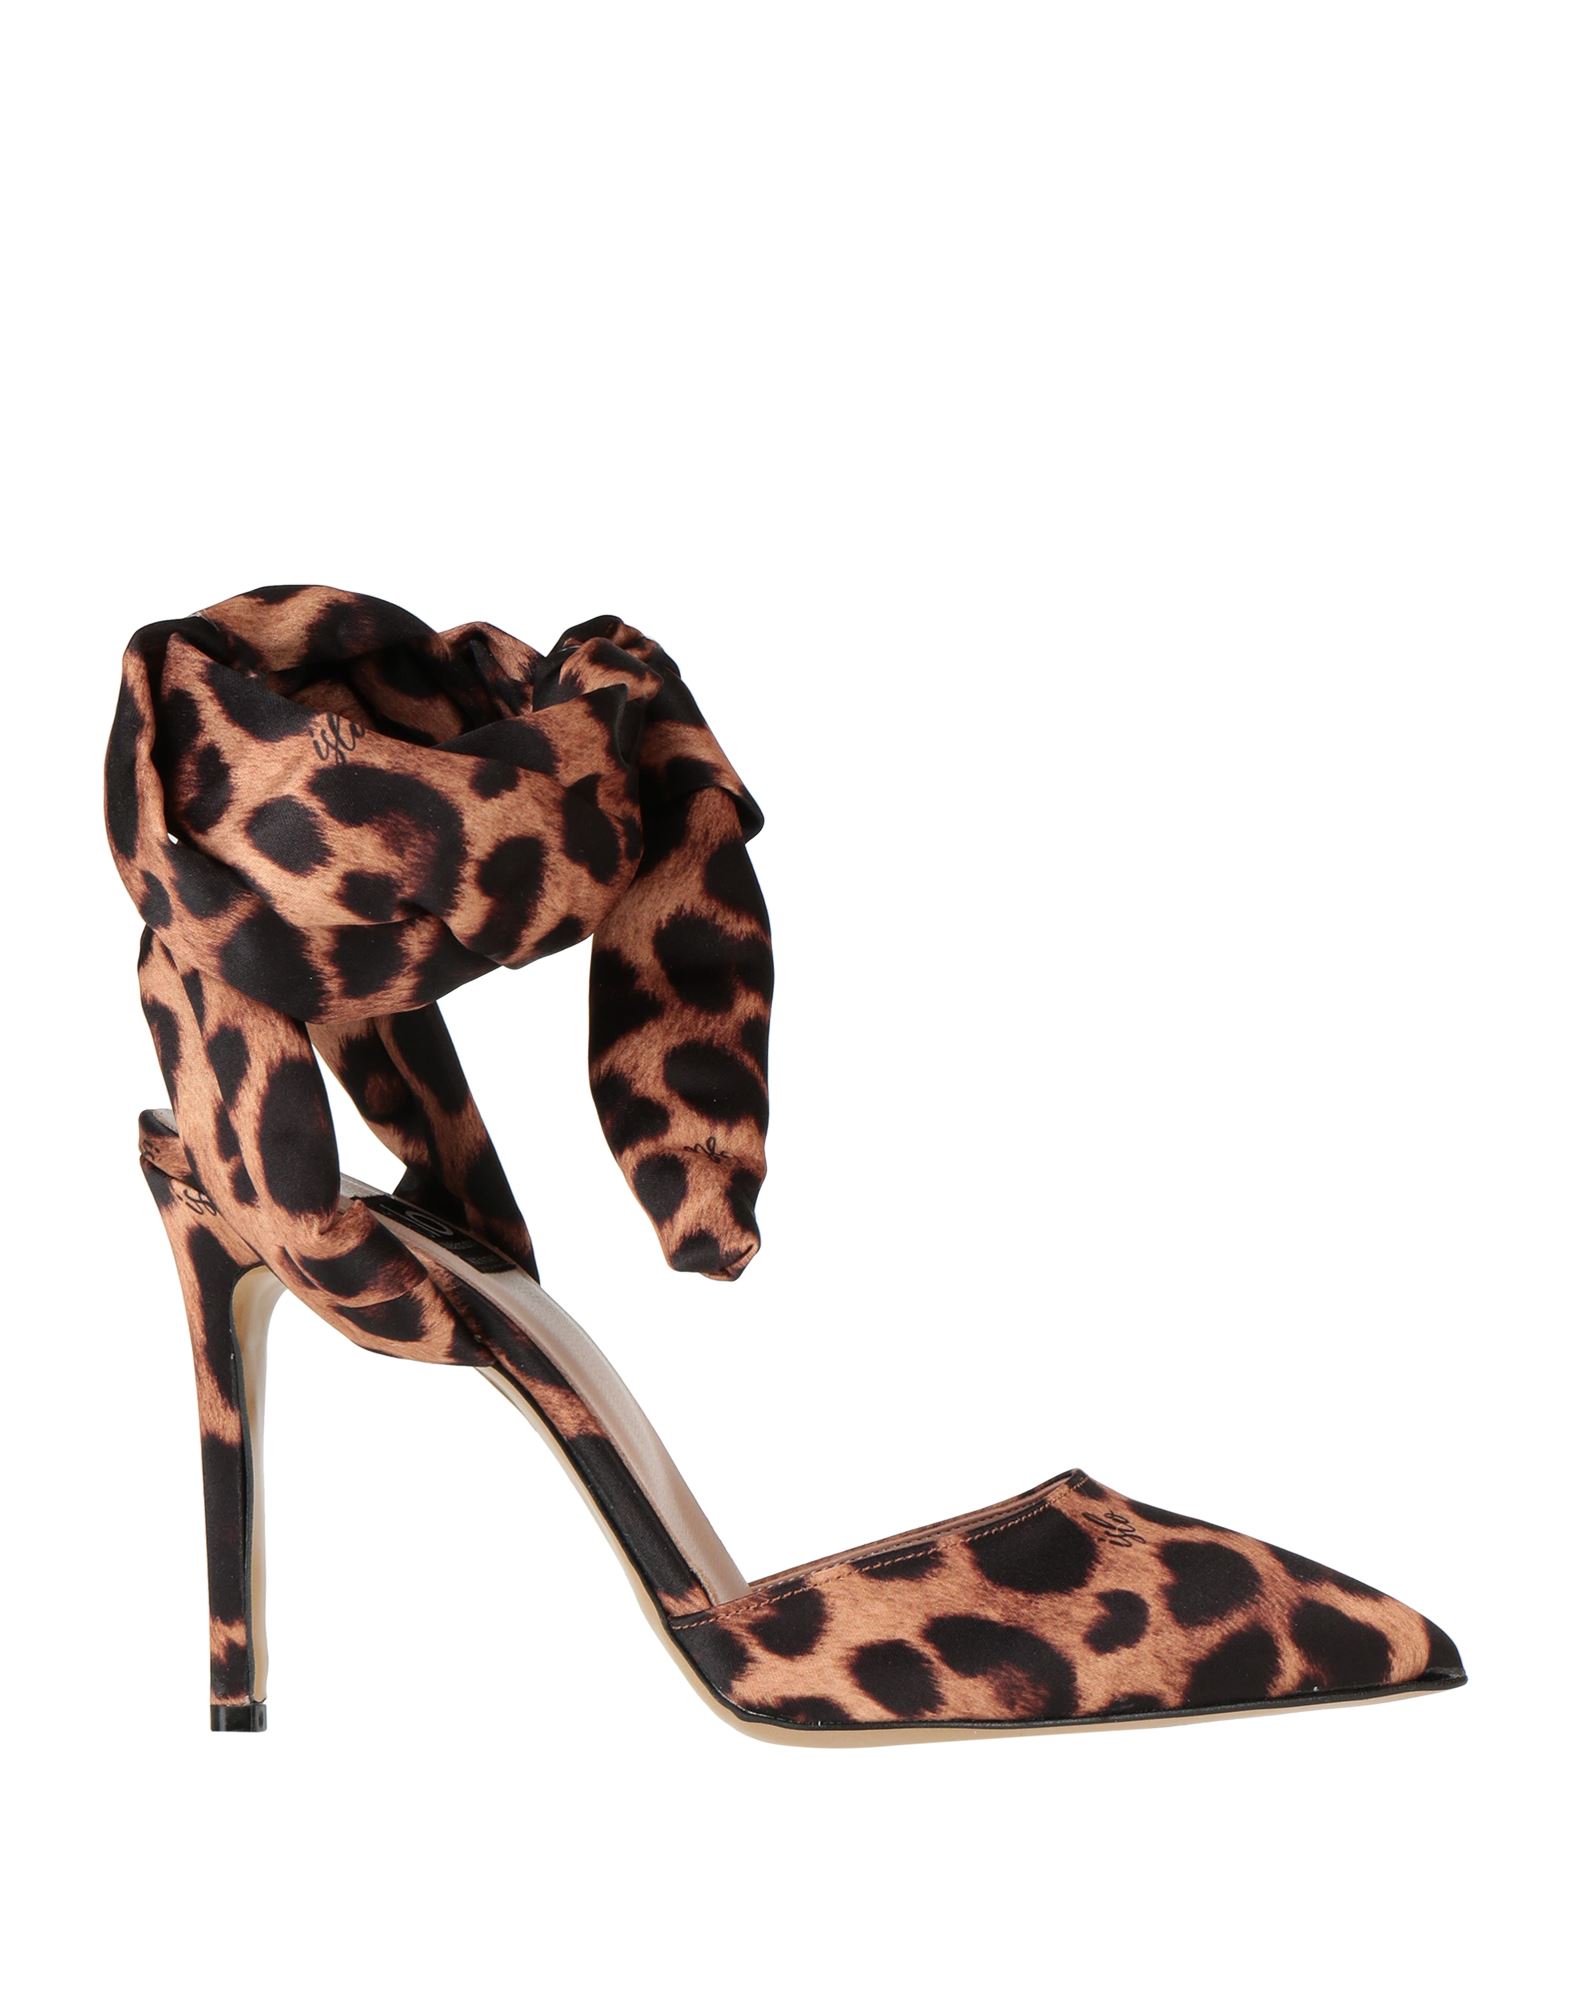 Islo Isabella Lorusso Pumps In Brown